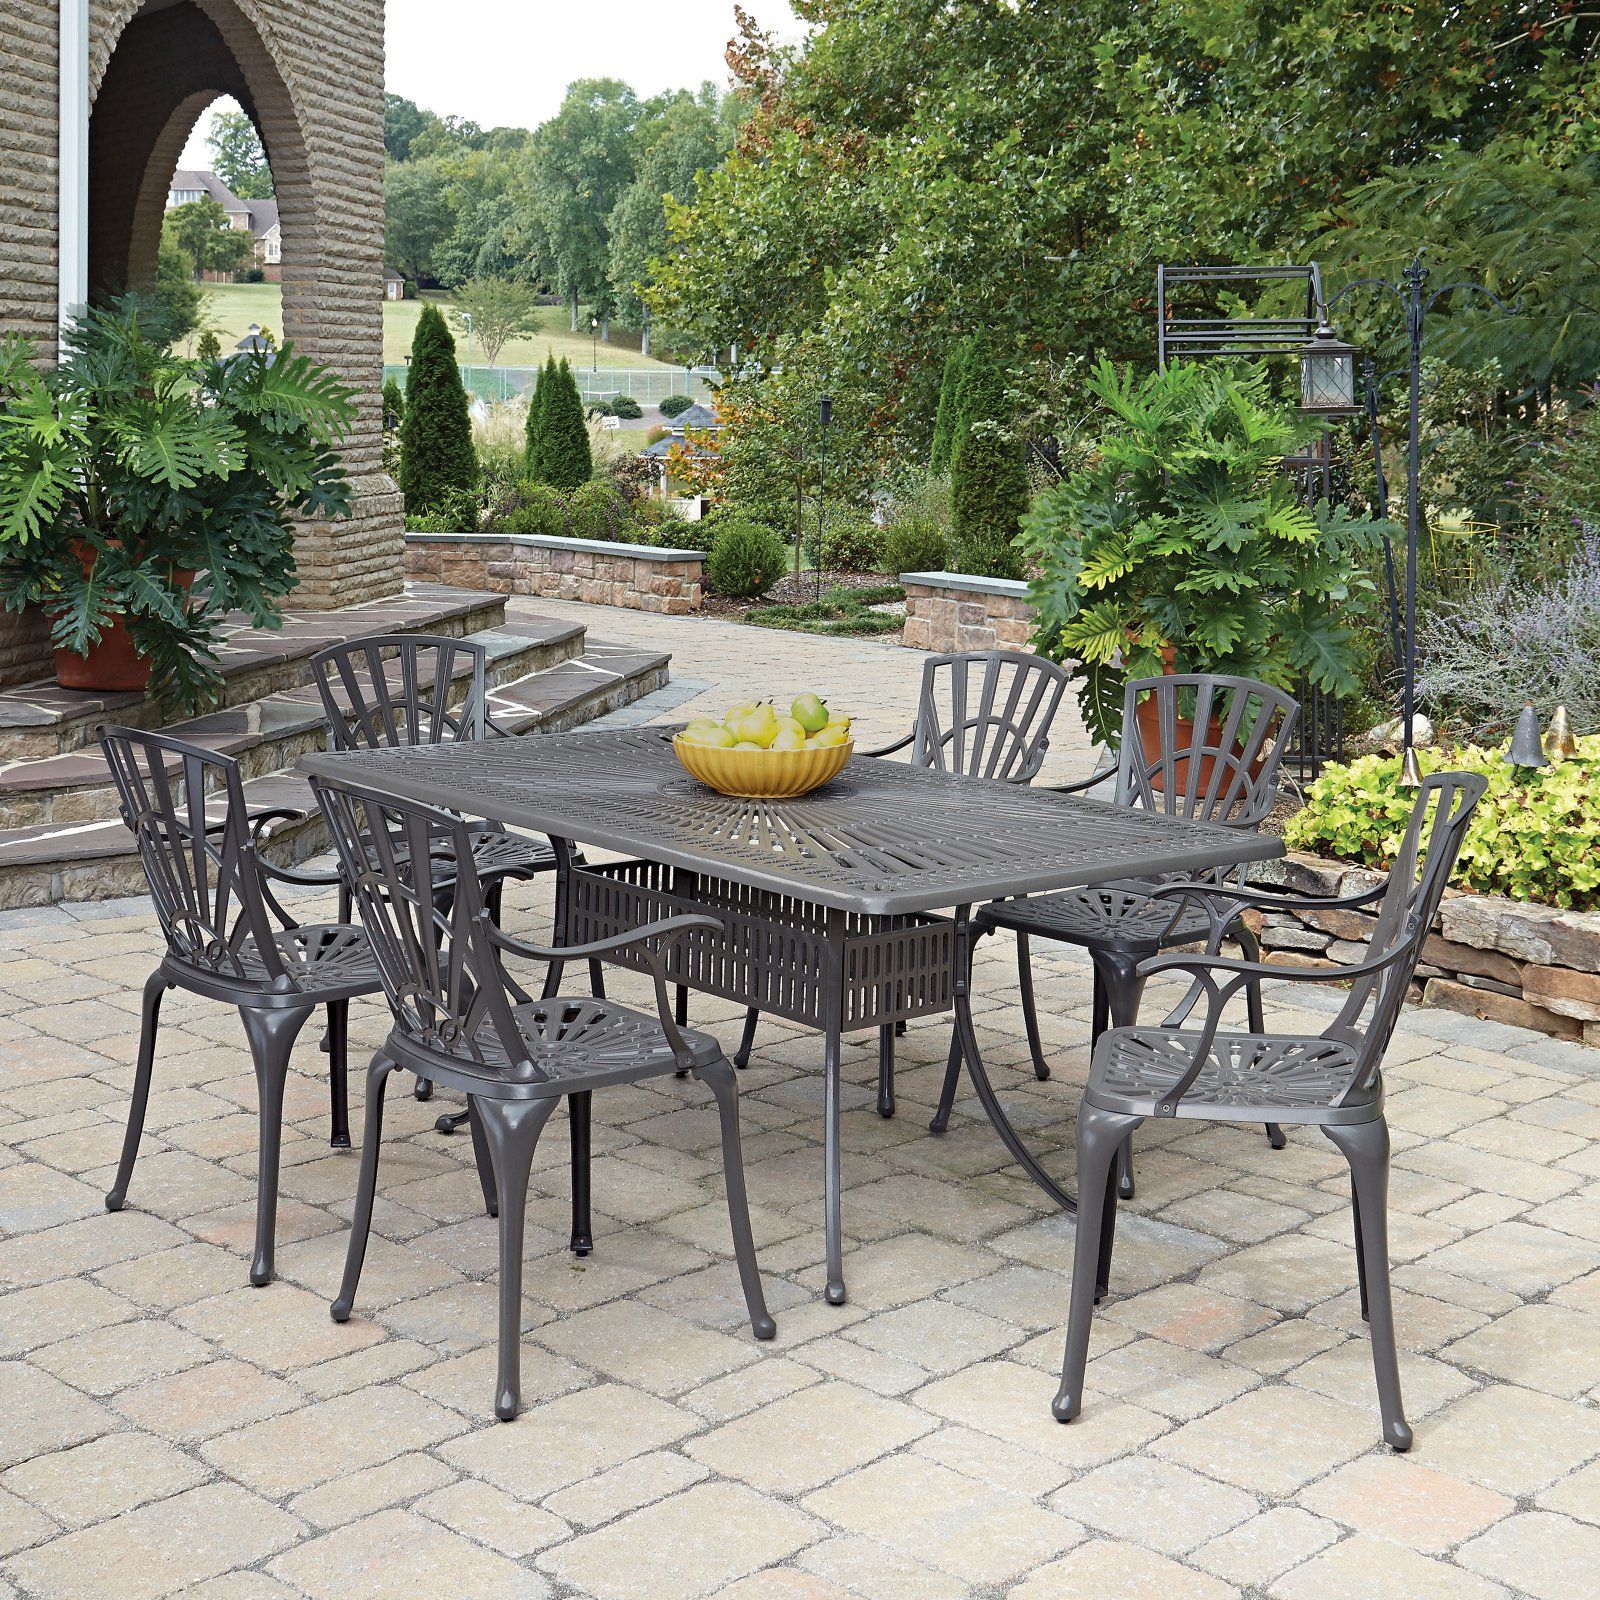 Newest Home Styles Largo 7pc Outdoor Dining Set Includes Rectangular Table And For Rectangular Patio Dining Sets (View 5 of 15)